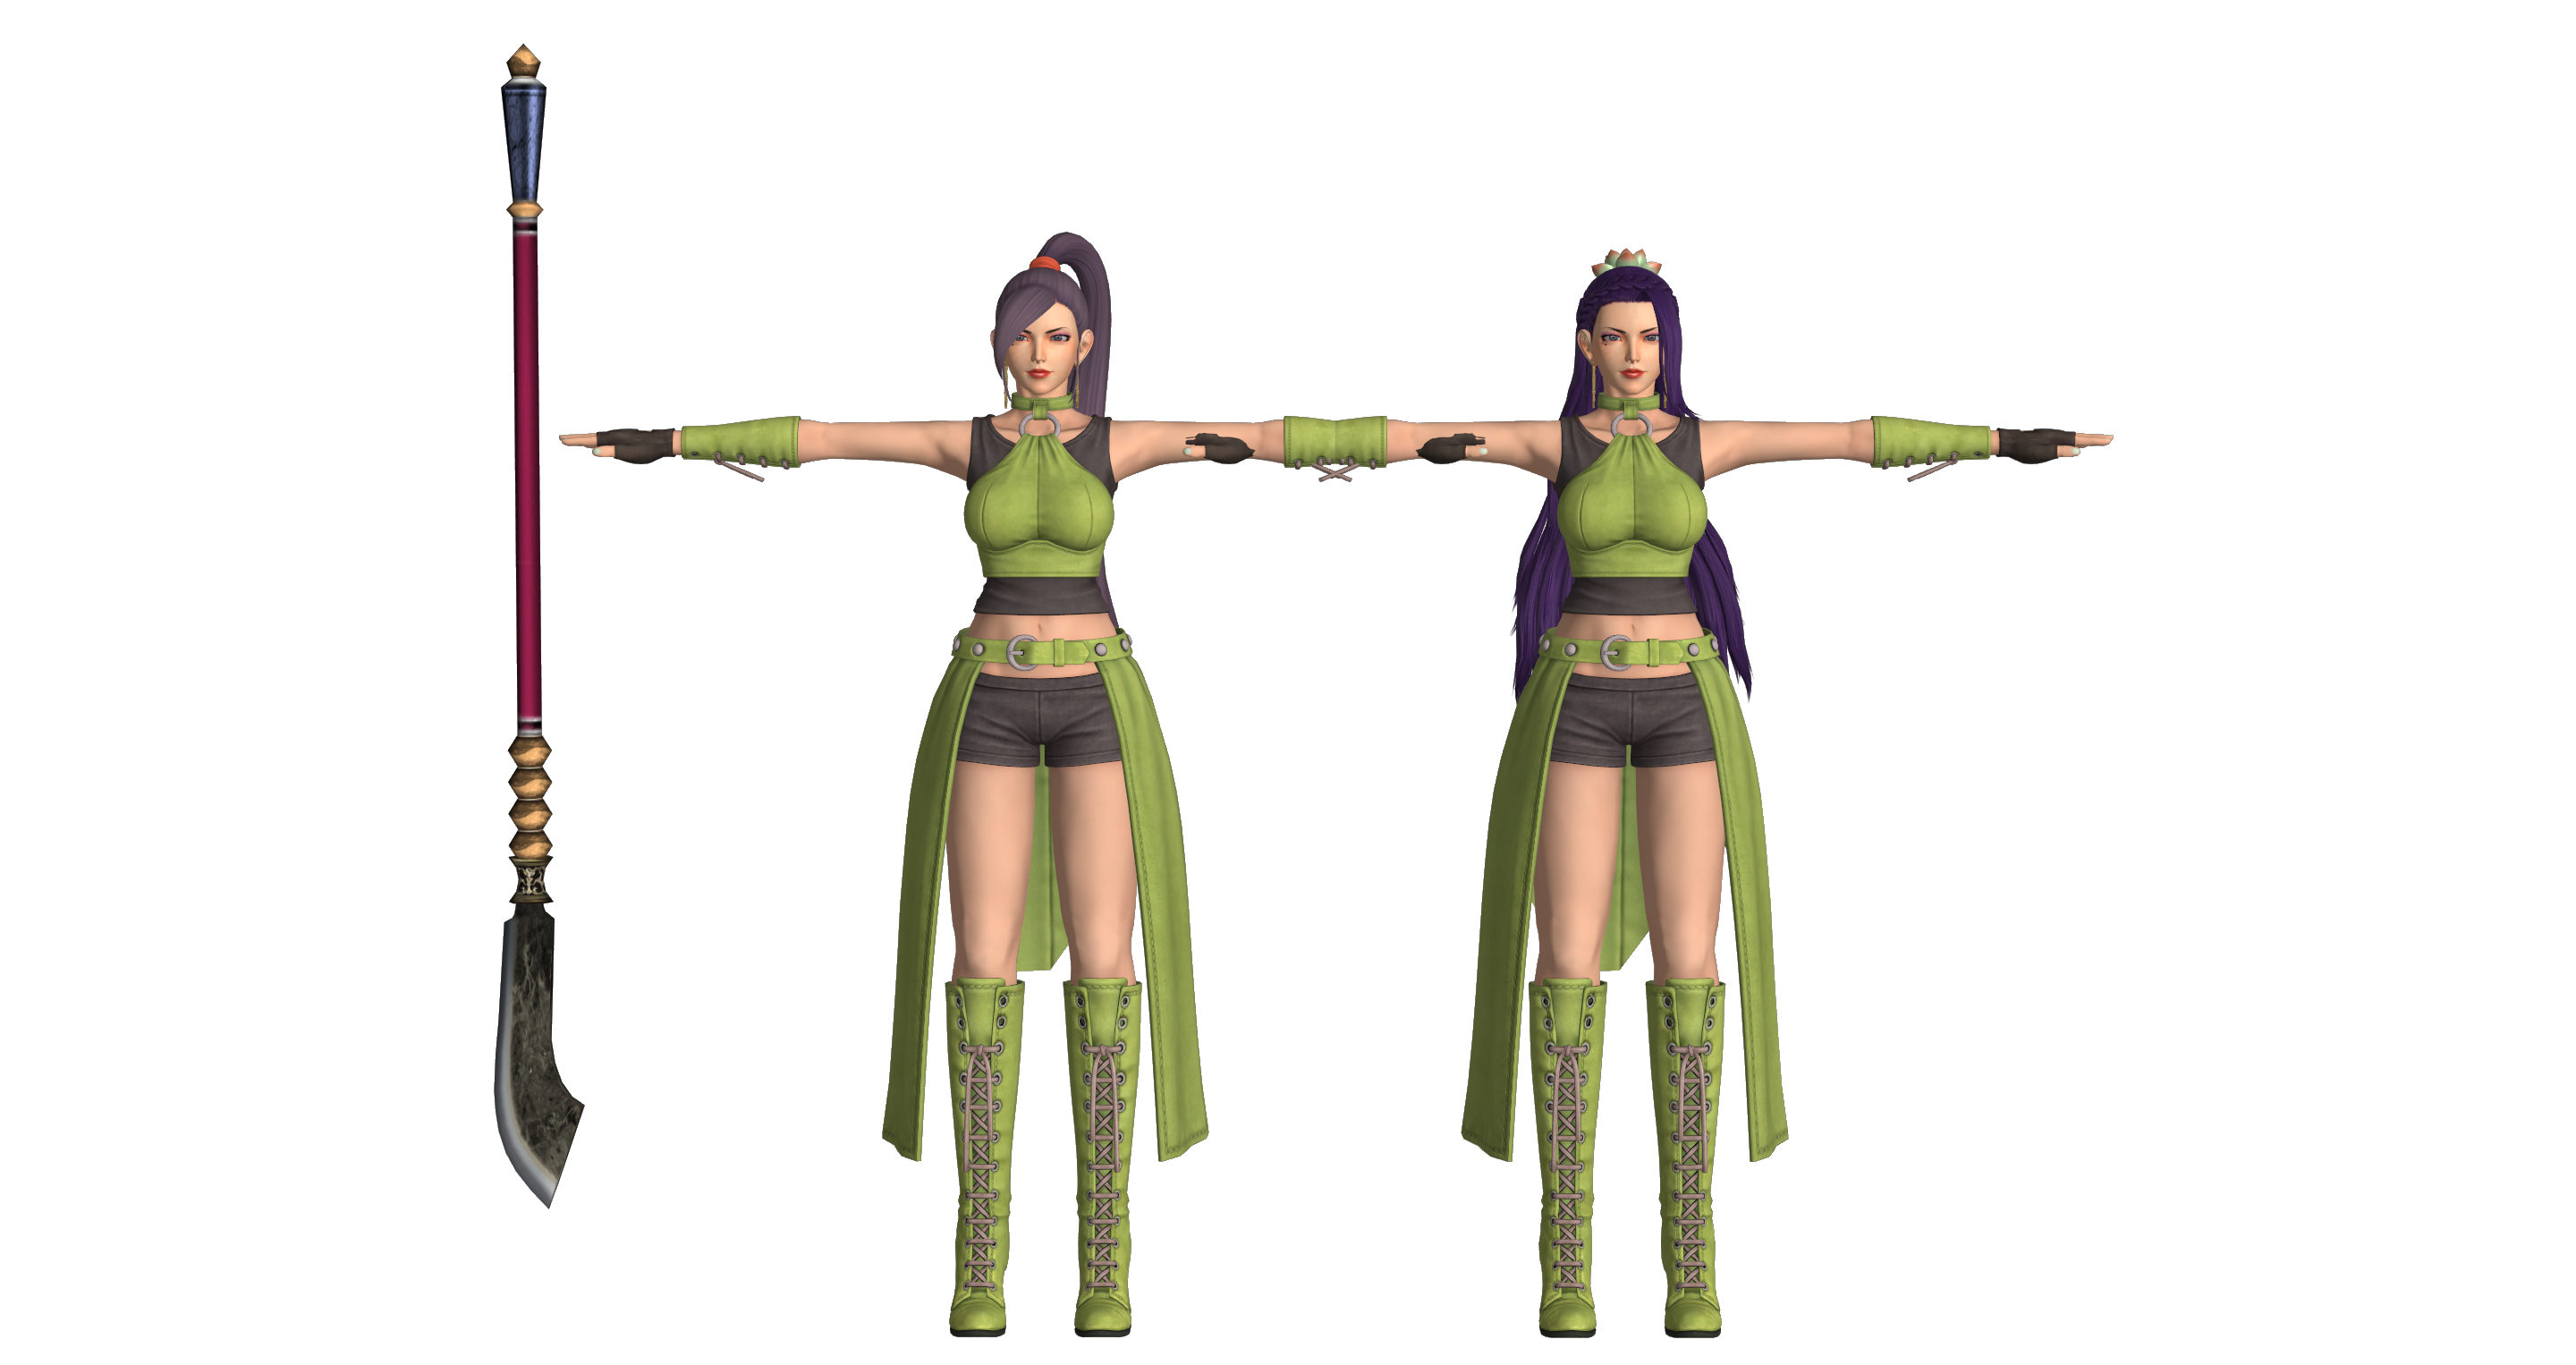 Jade (Dragon Quest XI) Defeated #12 by RyonaPalace on DeviantArt